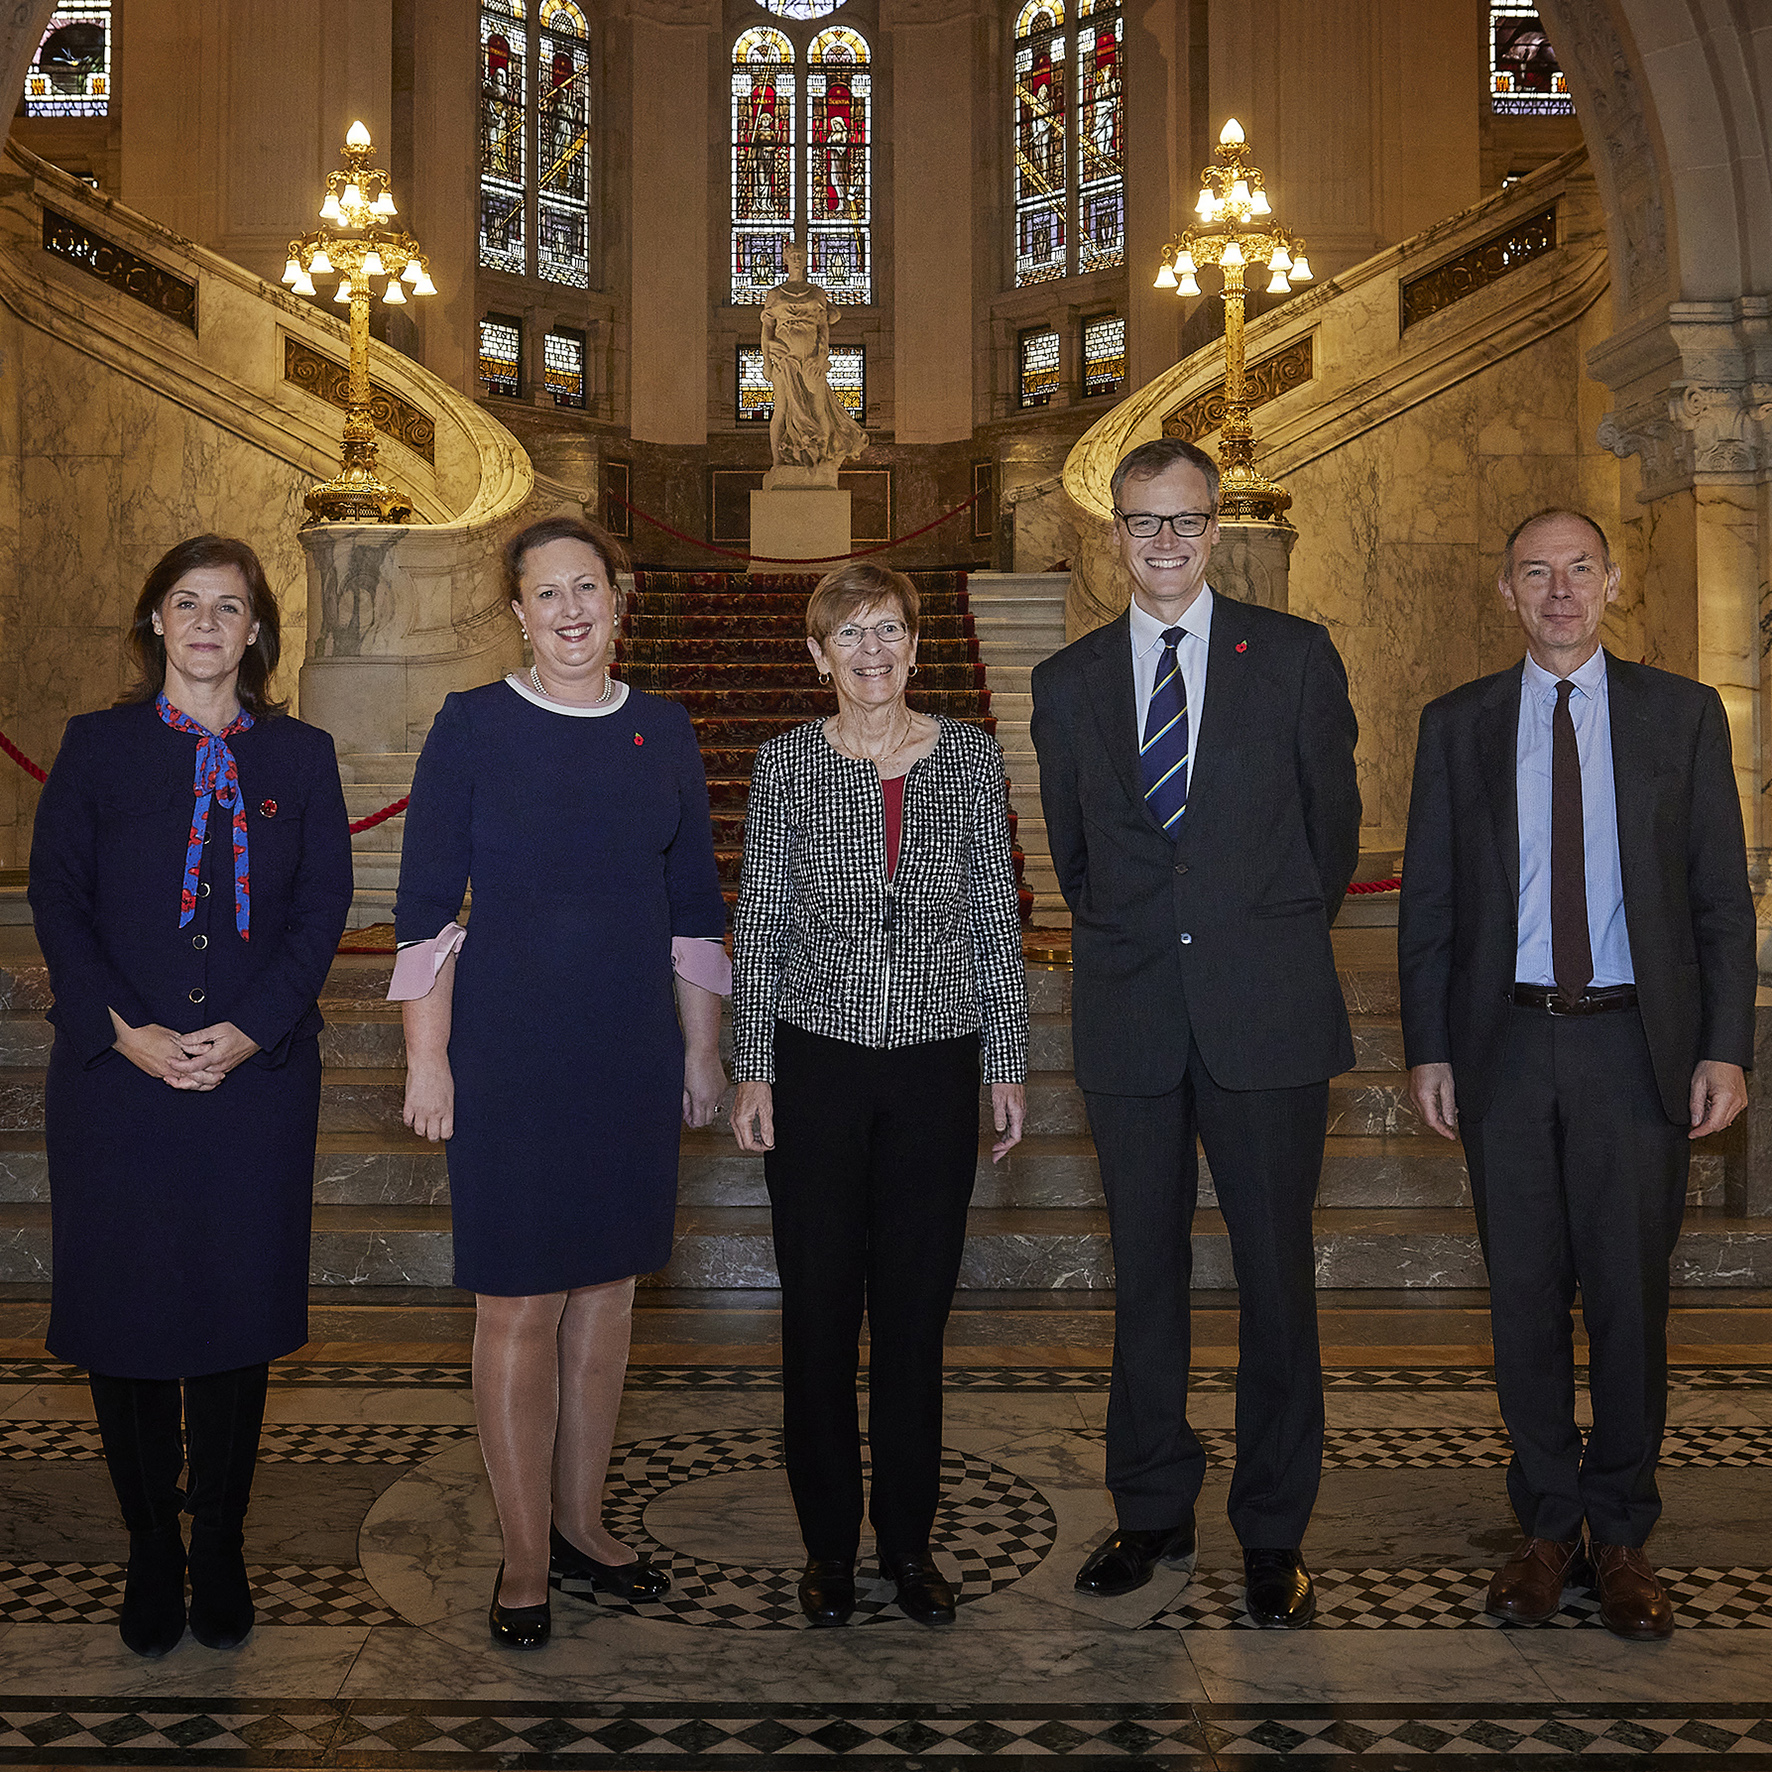 Visit of H.E. Ms Victoria Prentis, Attorney General for England and Wales and Advocate General for Northern Ireland,  and H.E. Mr. Michael Tomlinson, Solicitor General for England and Wales, to the International Court of Justice